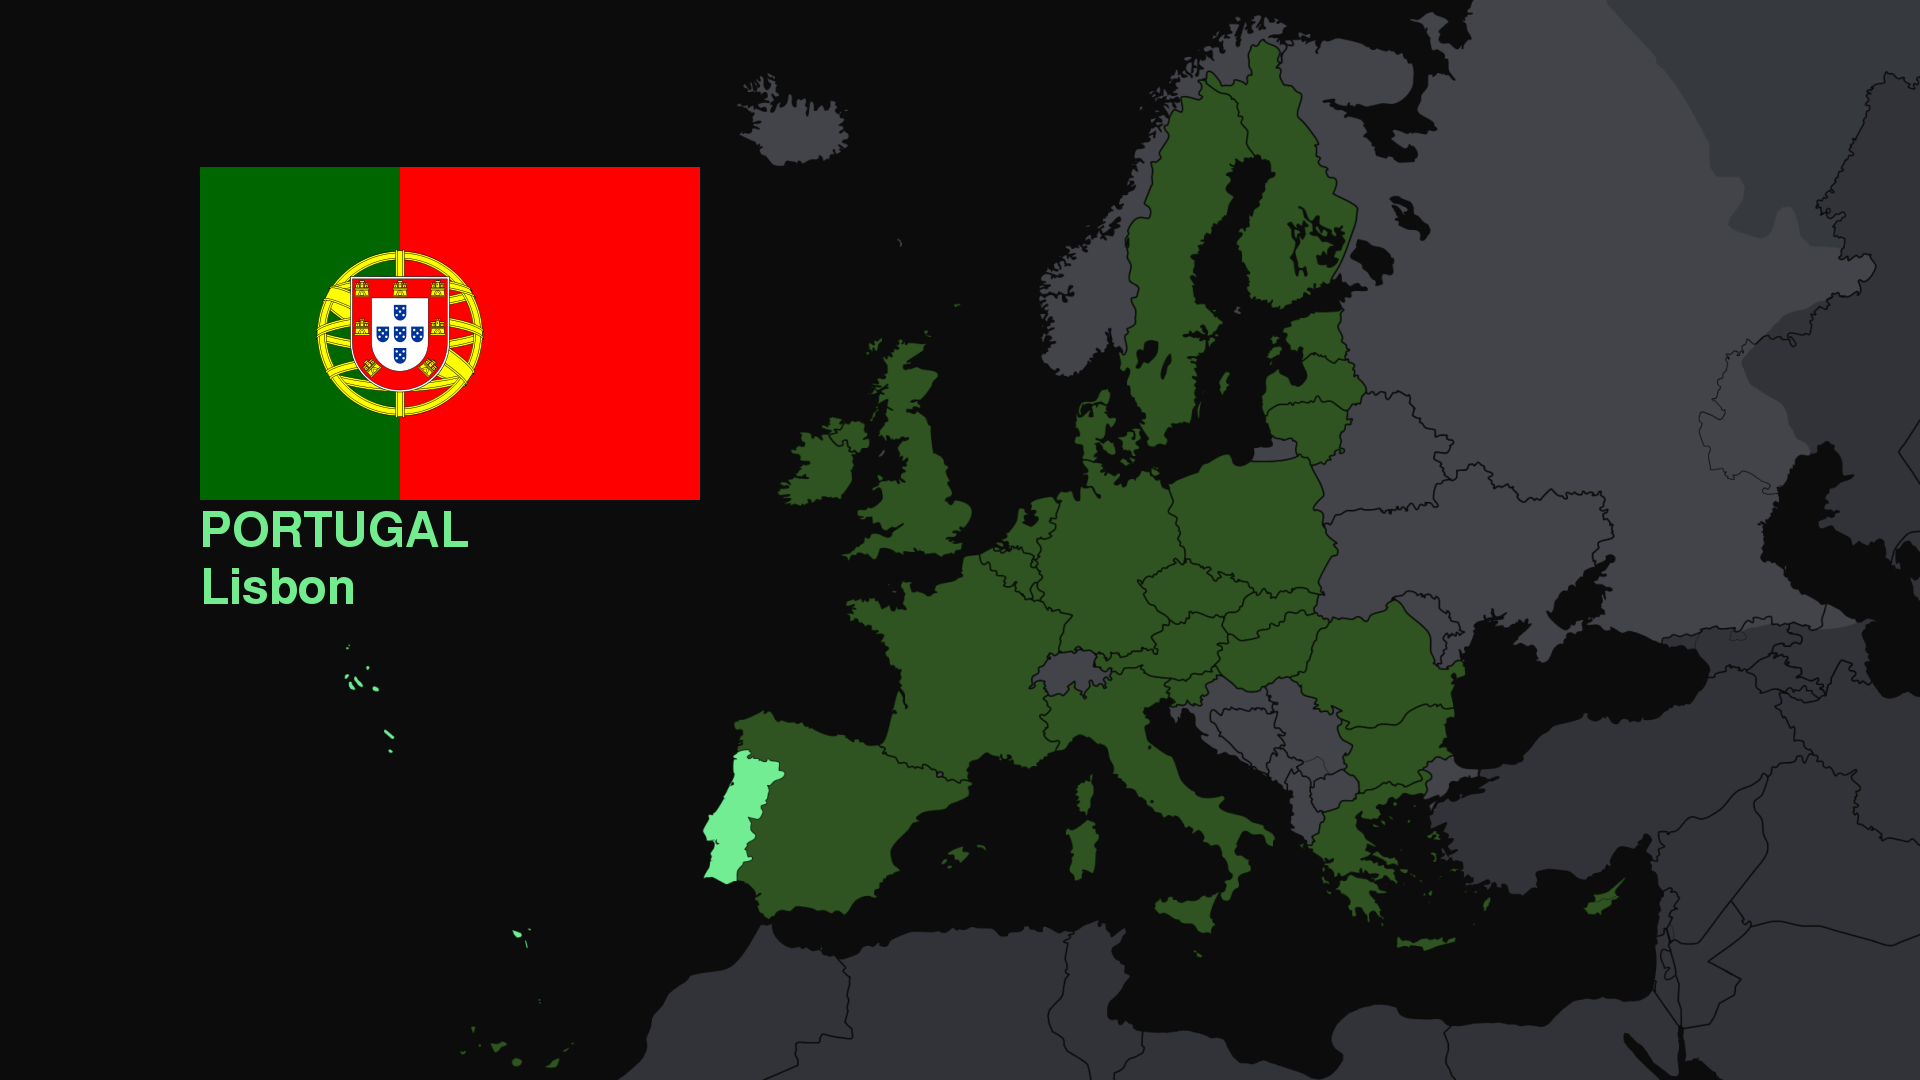 General 1920x1080 Portugal Europe map flag